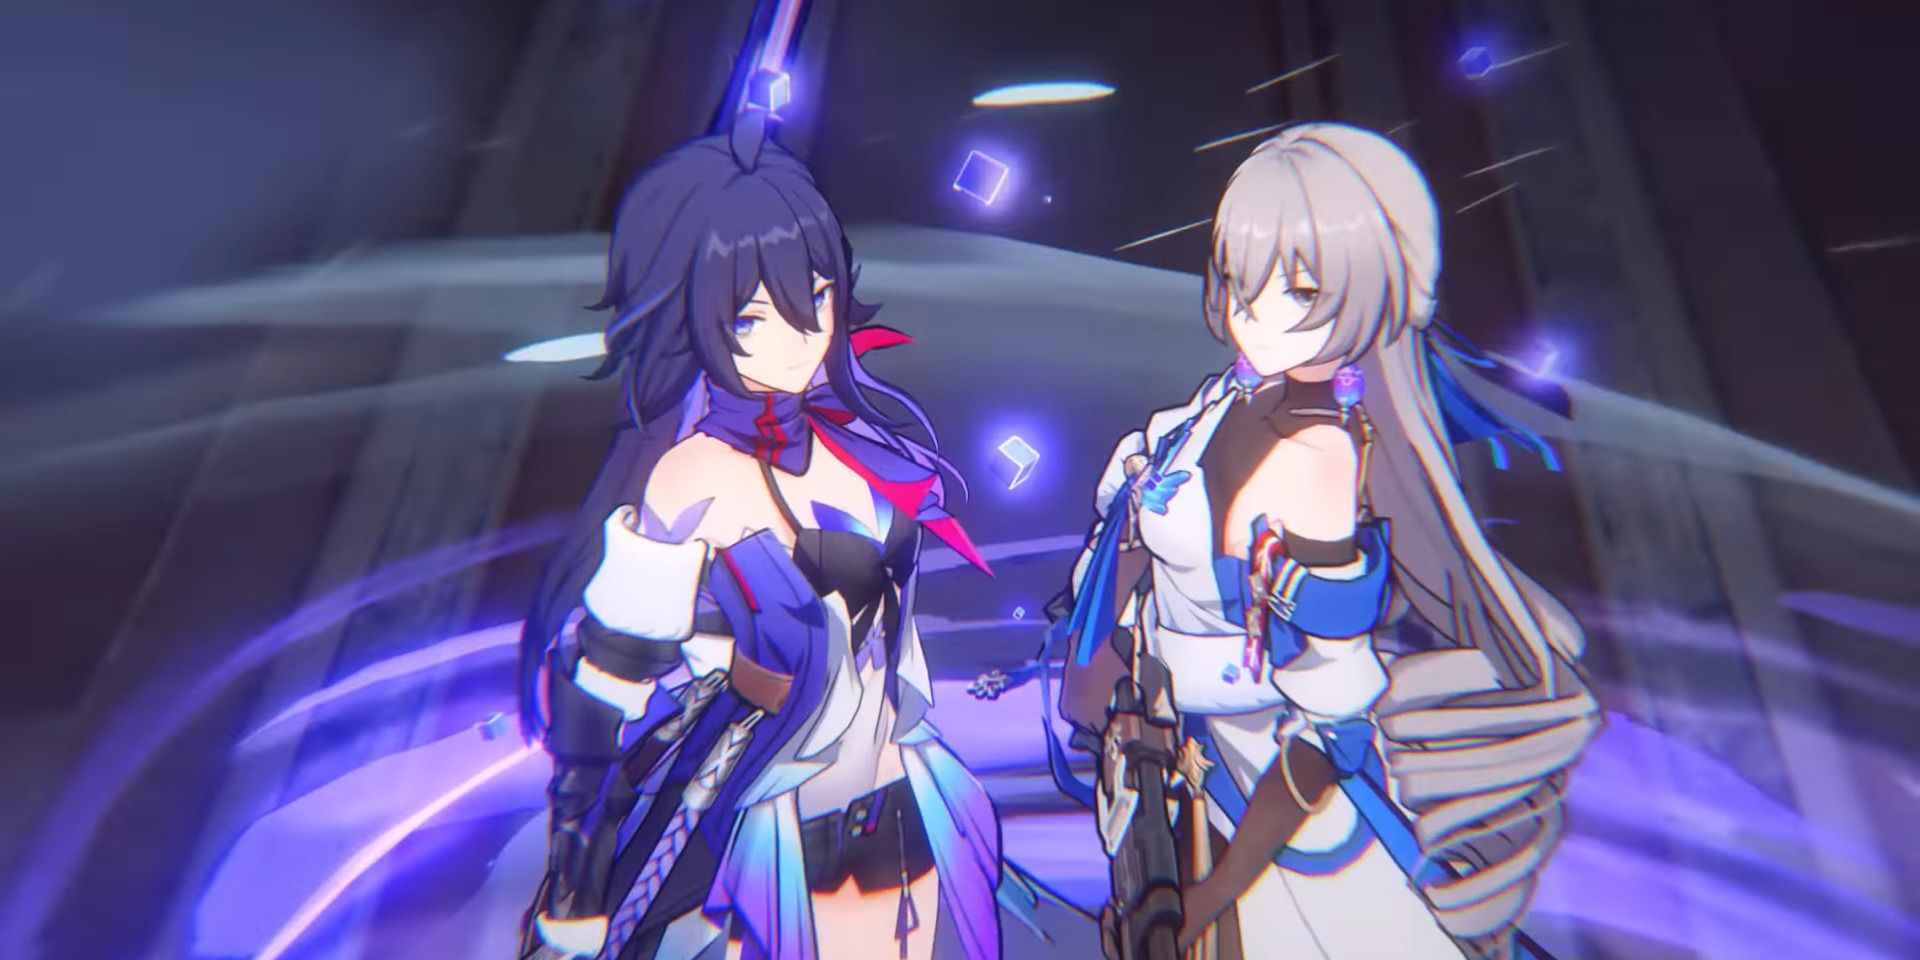 Image of the characters Seele and Bronya in a character trailer for Honkai Star Rail.